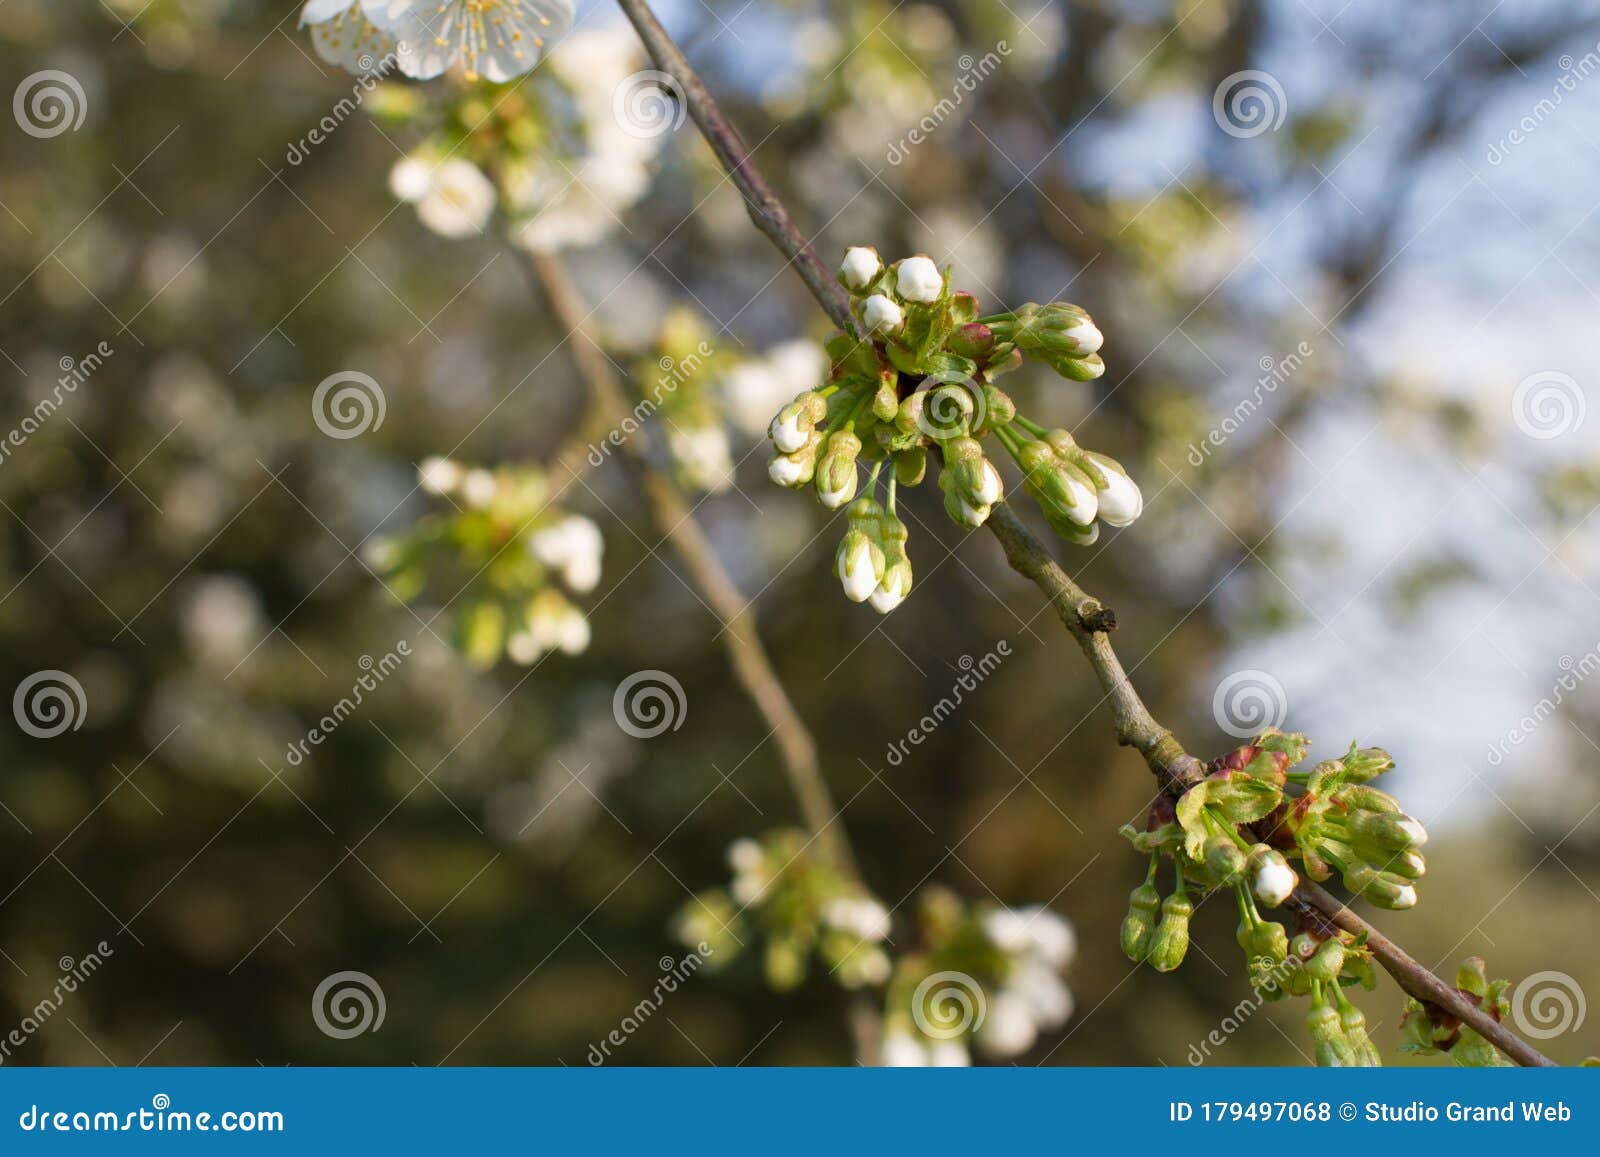 cherry blossom buds blooming for natural resources and vegetal beauty